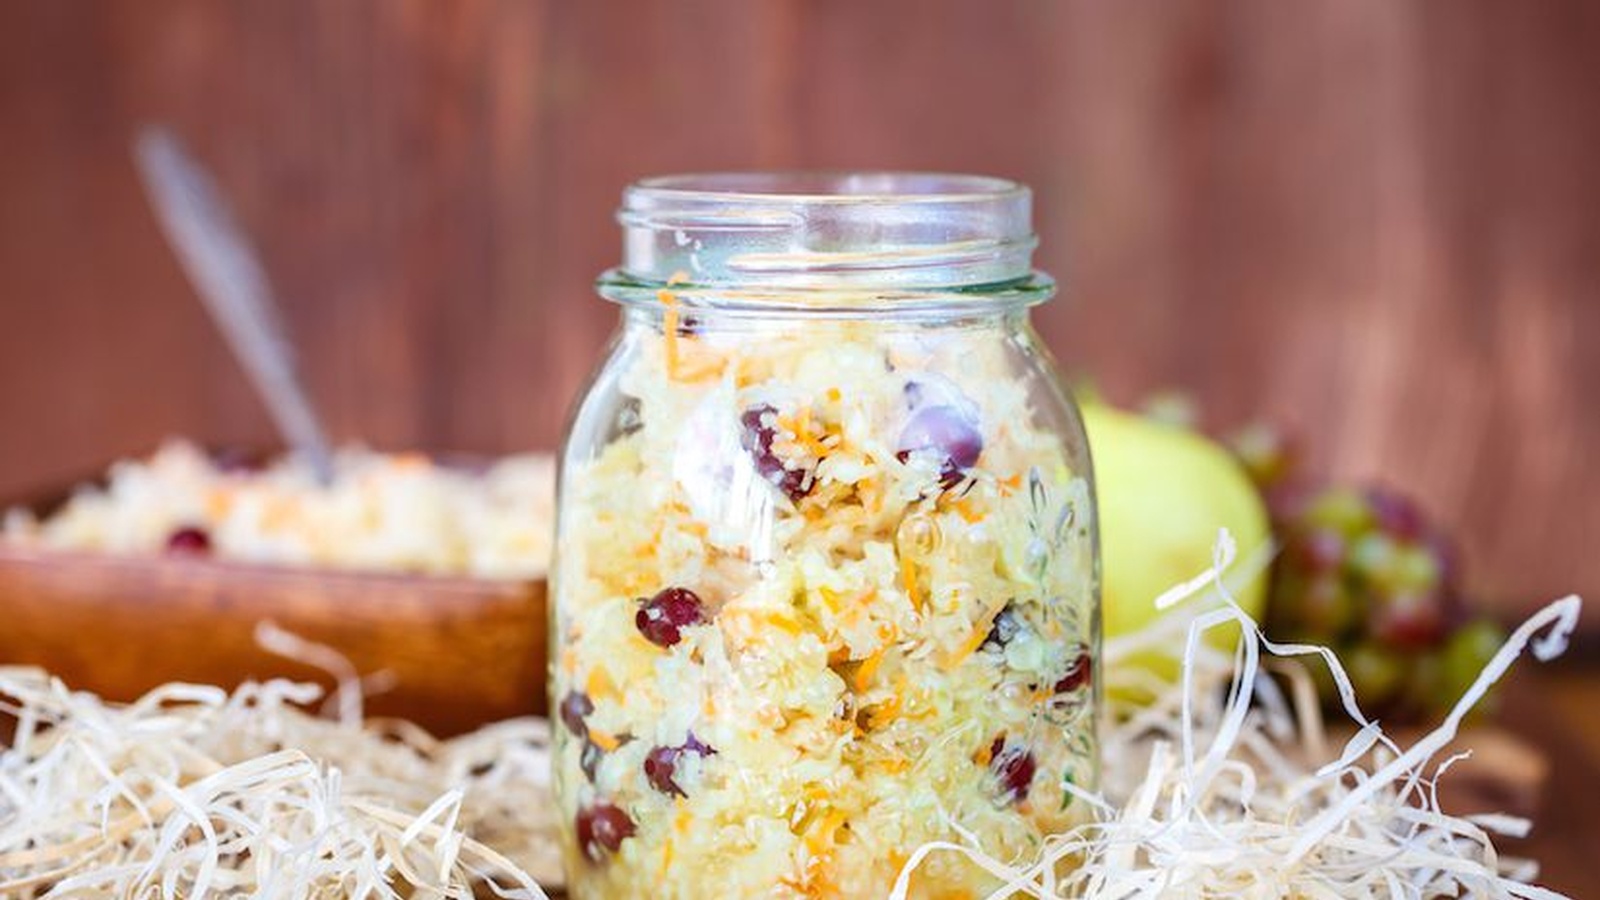 8 Awesome Reasons To Eat Fermented Foods